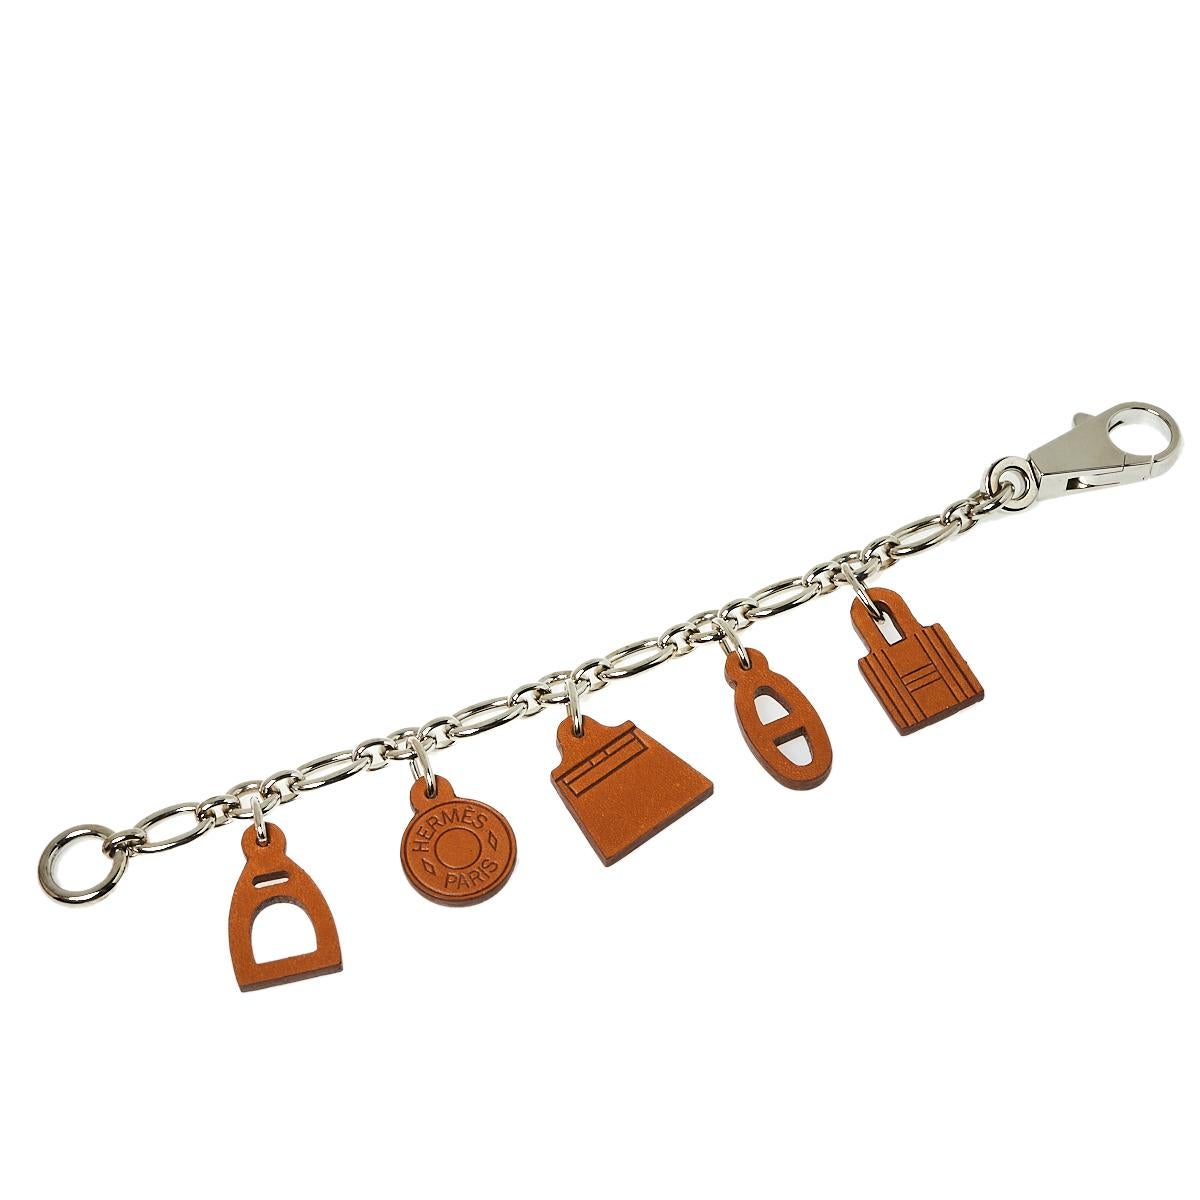 Let your pretty bag enjoy the company of this lovely Barenia Breloque Olga Amulette bag charm by Hermes. Made from si;ver-tone metal, the chain holds signature motifs rendered in quality leather. Eye-catching and easy to attach, this bag will make a